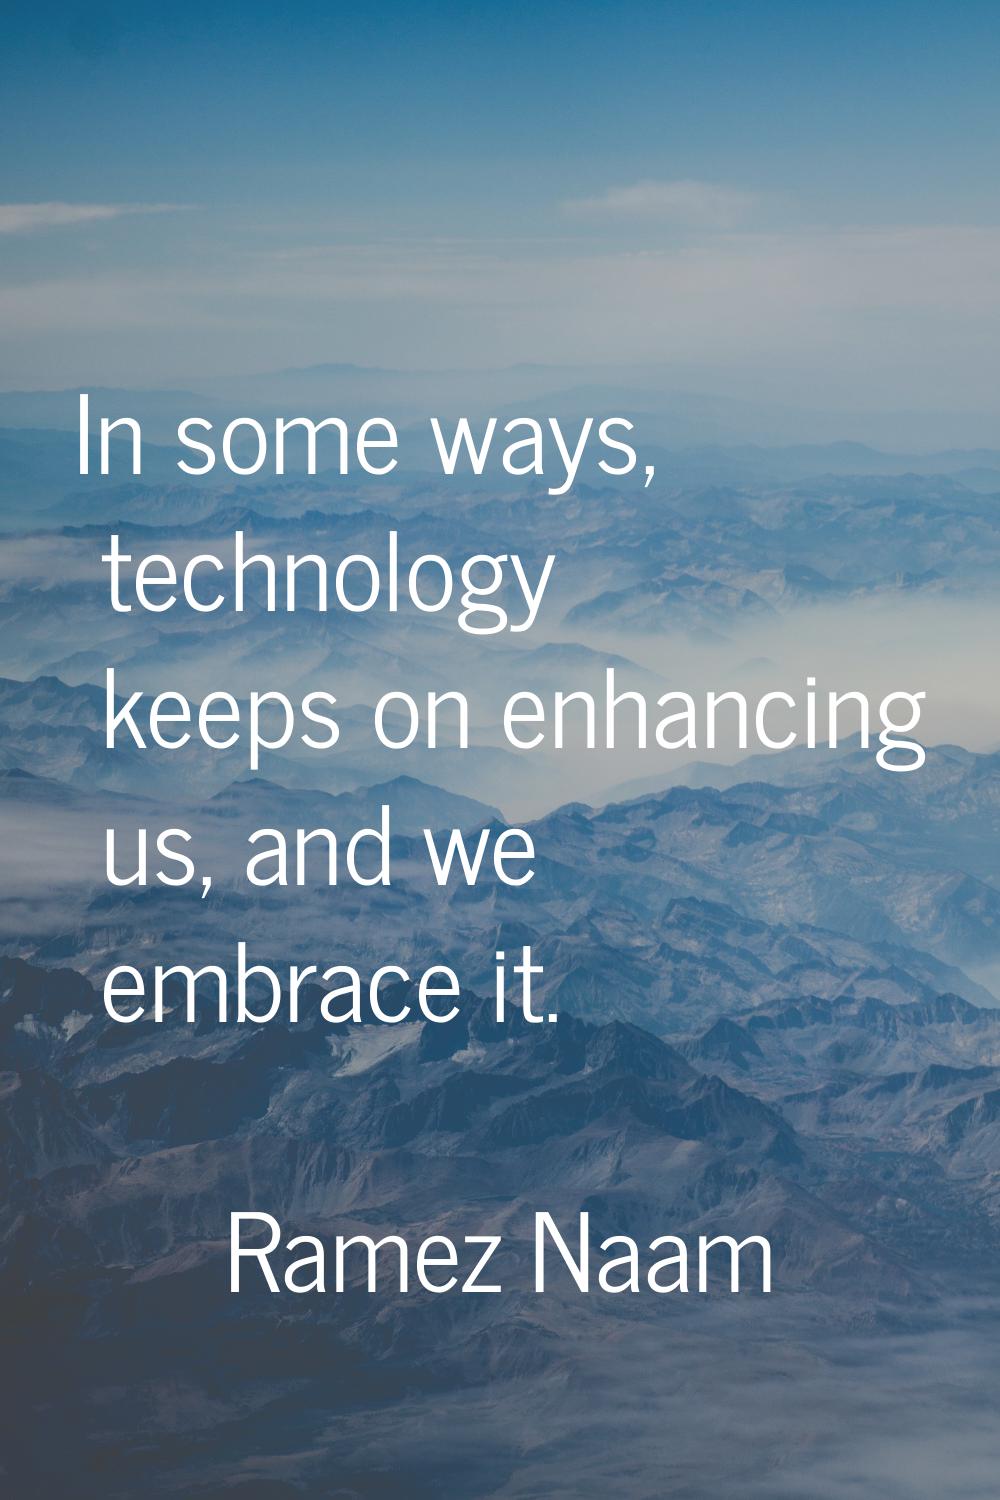 In some ways, technology keeps on enhancing us, and we embrace it.